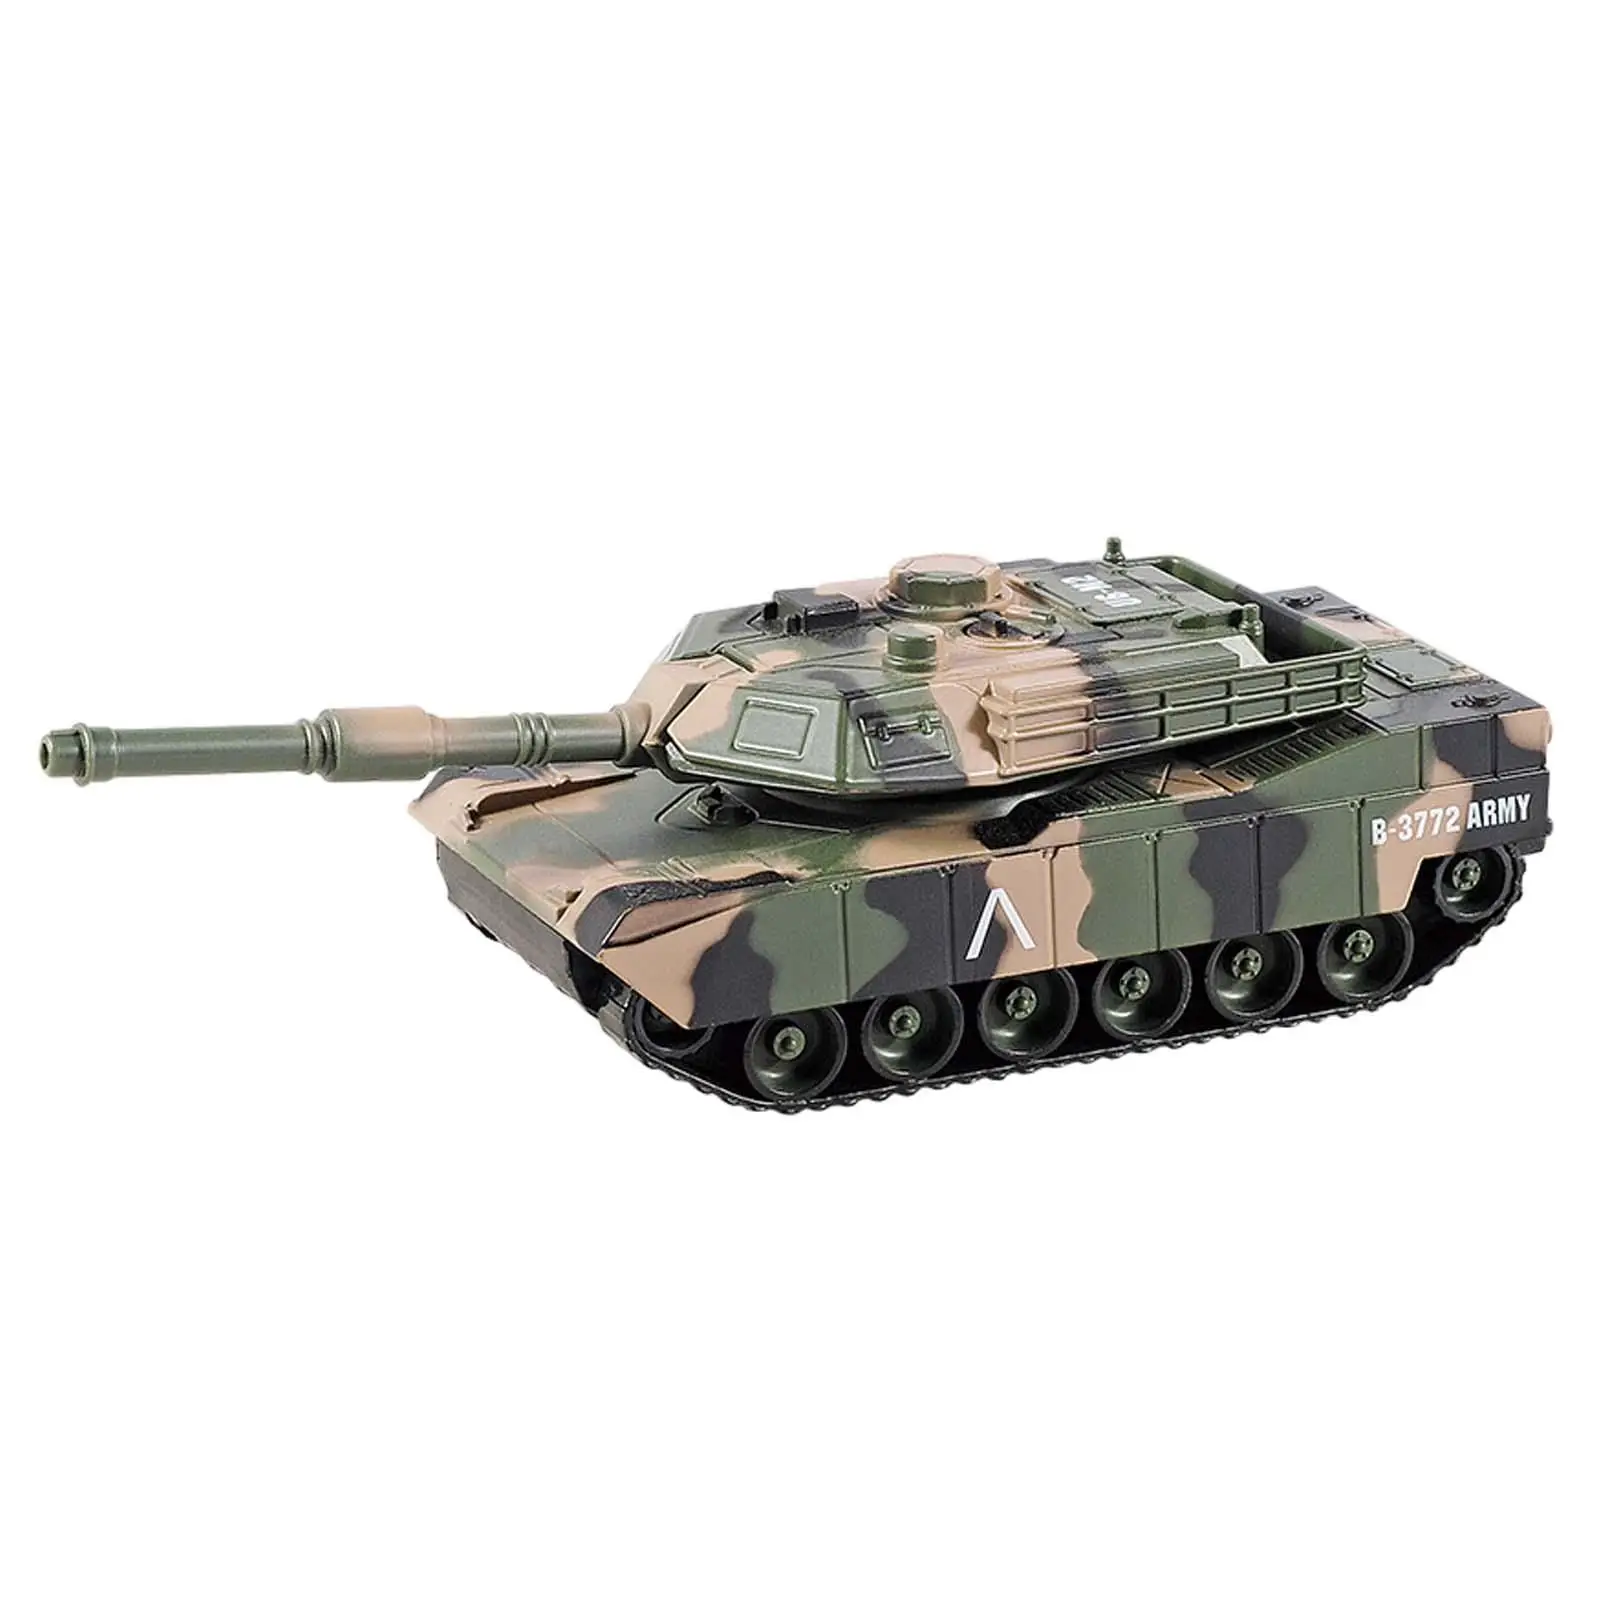 1/24 Tank Toy Pullback Motion Party Favors Creative Pull Back Tank Toy Alloy Diecast Tank for Kids Boys Girls 3-7 Years Old Gift